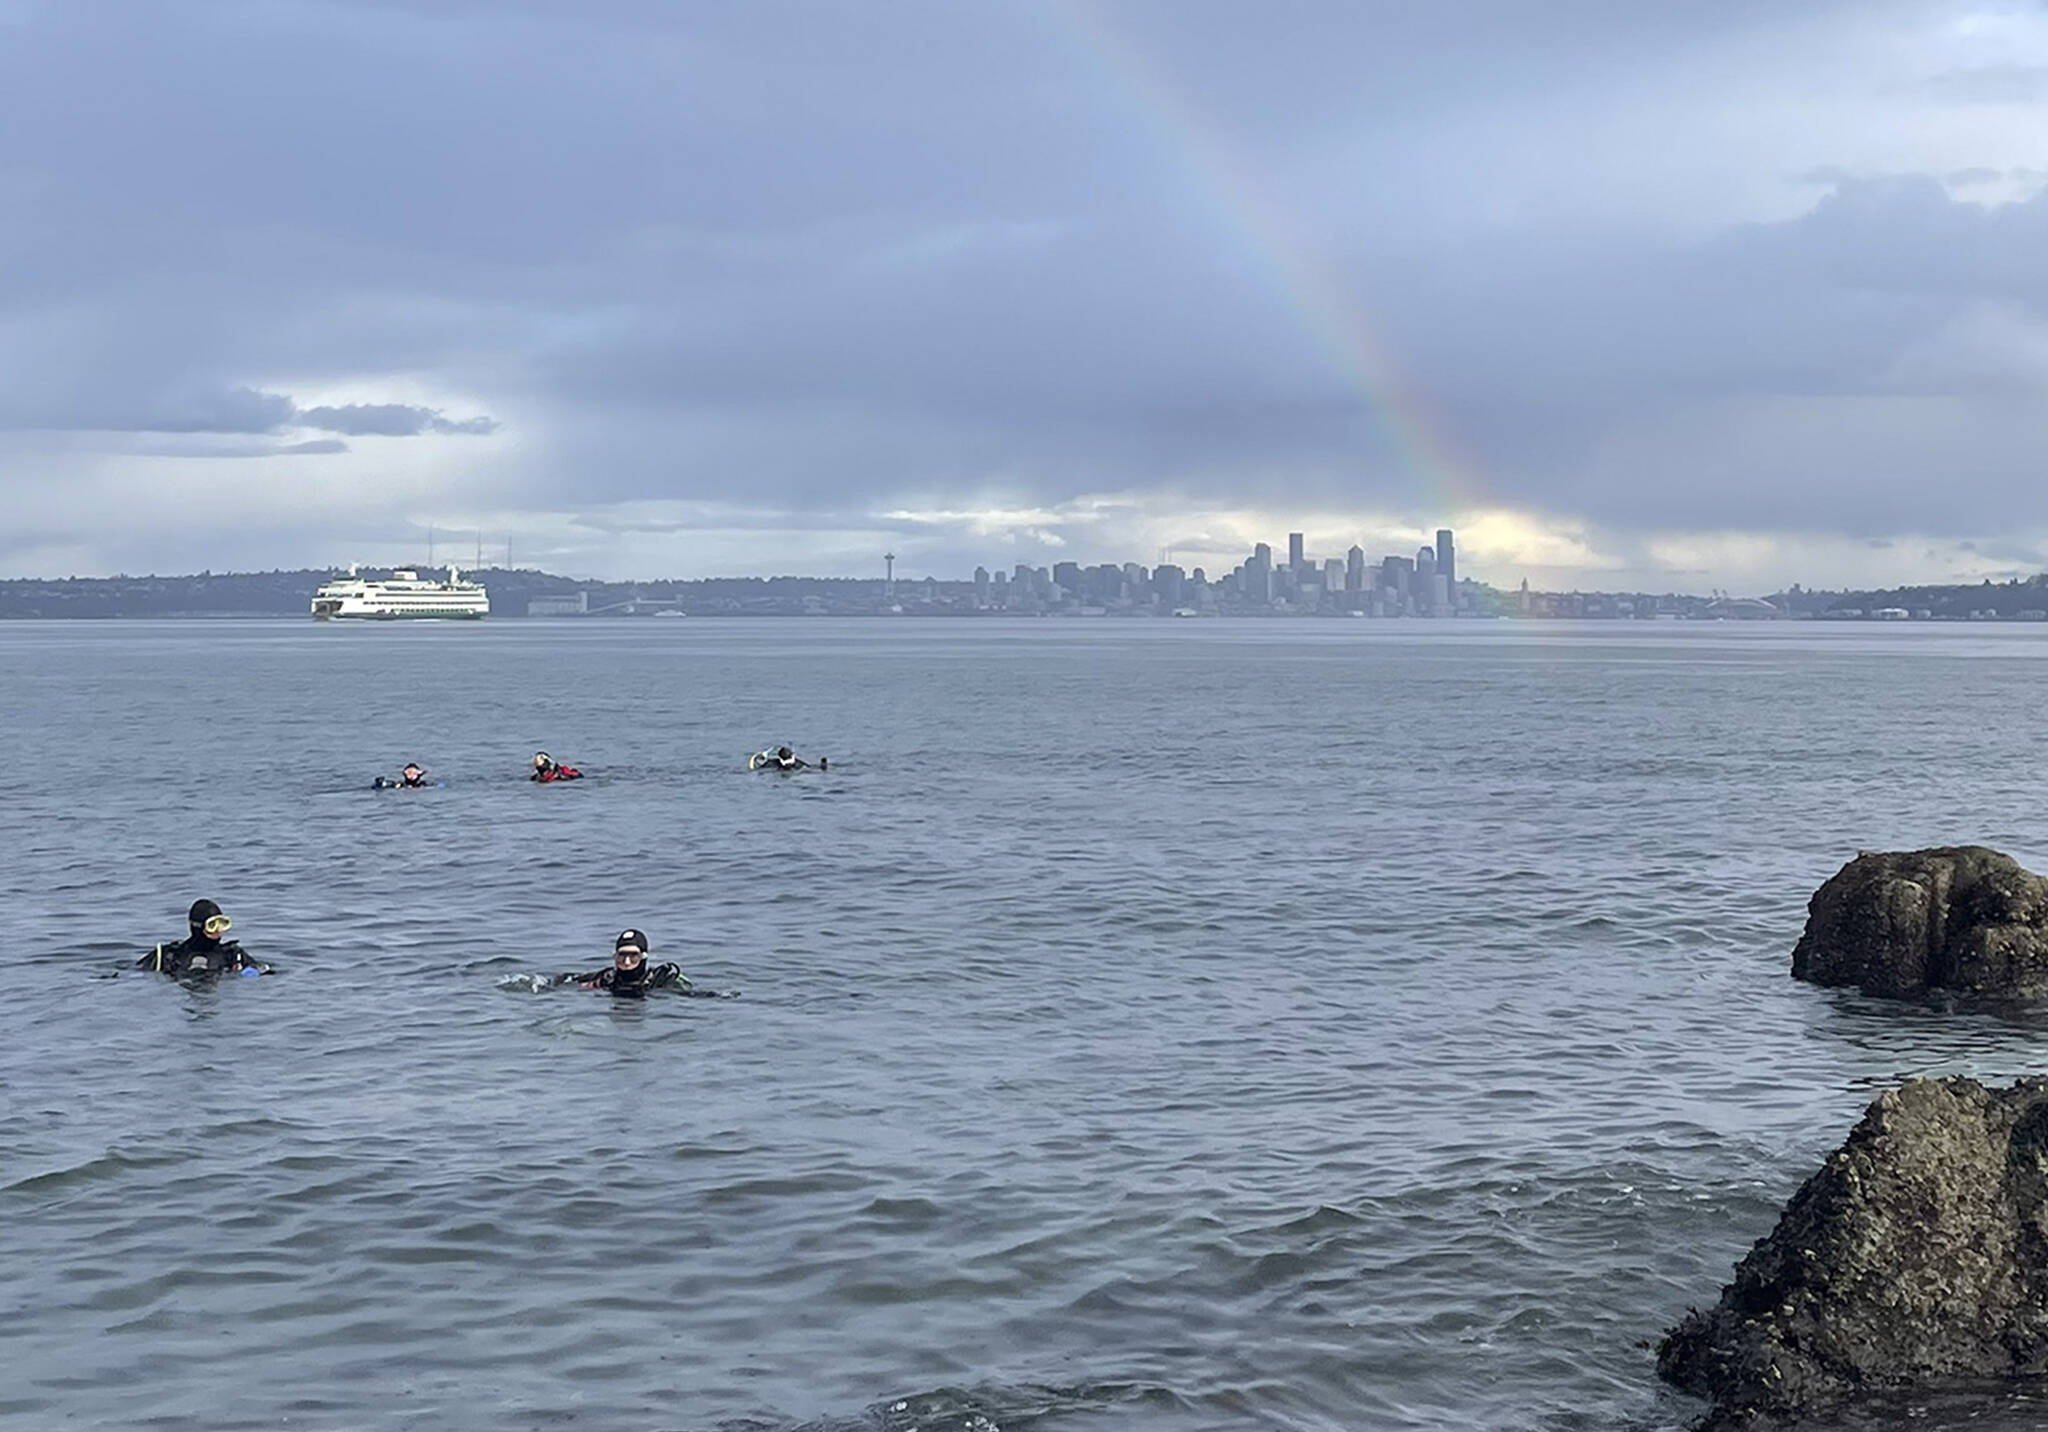 Somewhere under the rainbow waters are blue - and inhabited not only by a Washington State Ferries vessel, but also a group of scuba divers. This photo was submitted by Matthew Freniere of divers off Rockaway Beach.